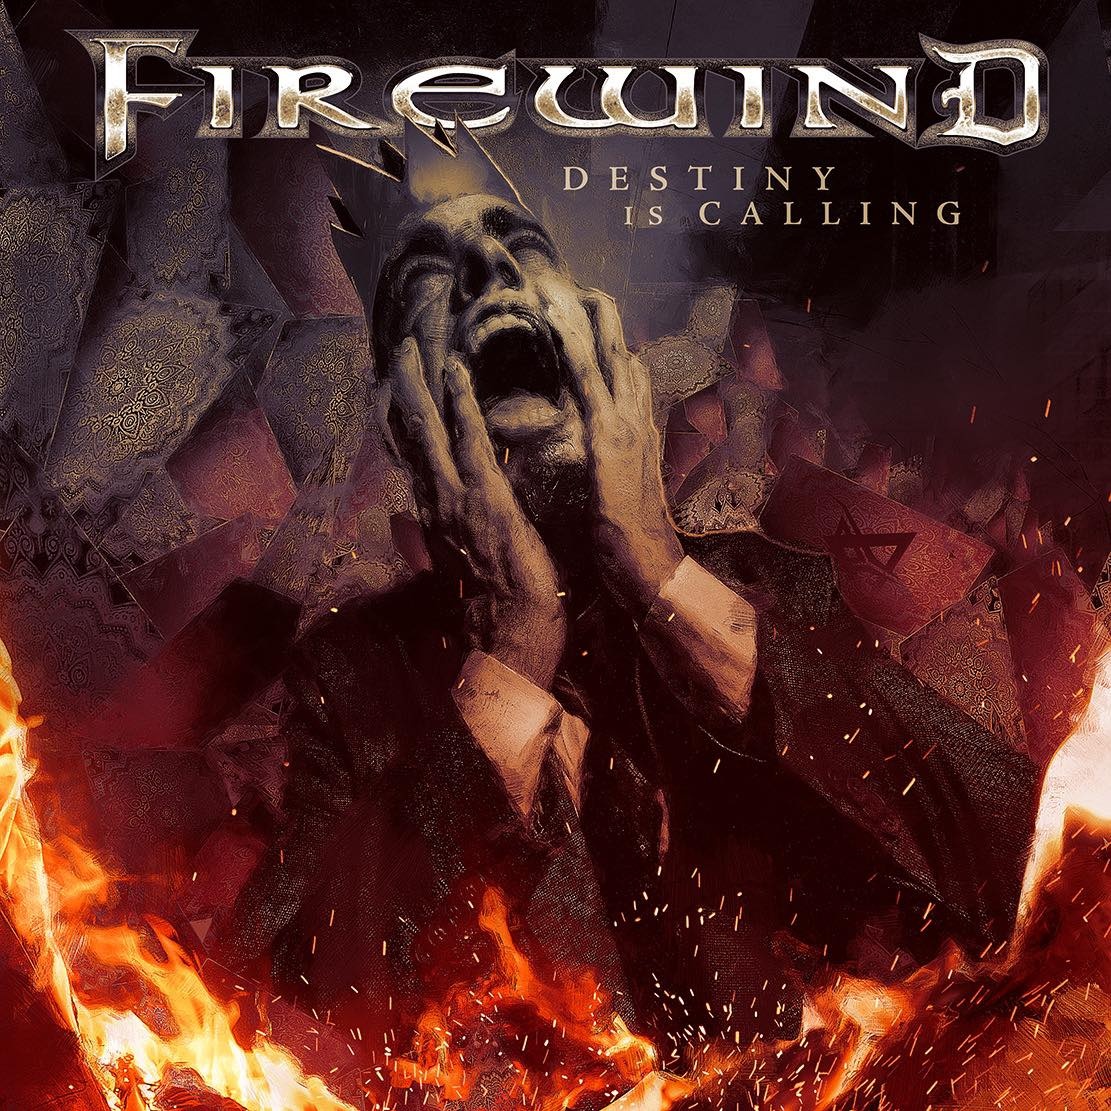 Watch New Firewind Video For Destiny Is Calling" Featuring Former Ozzy Guitarist Gus G!